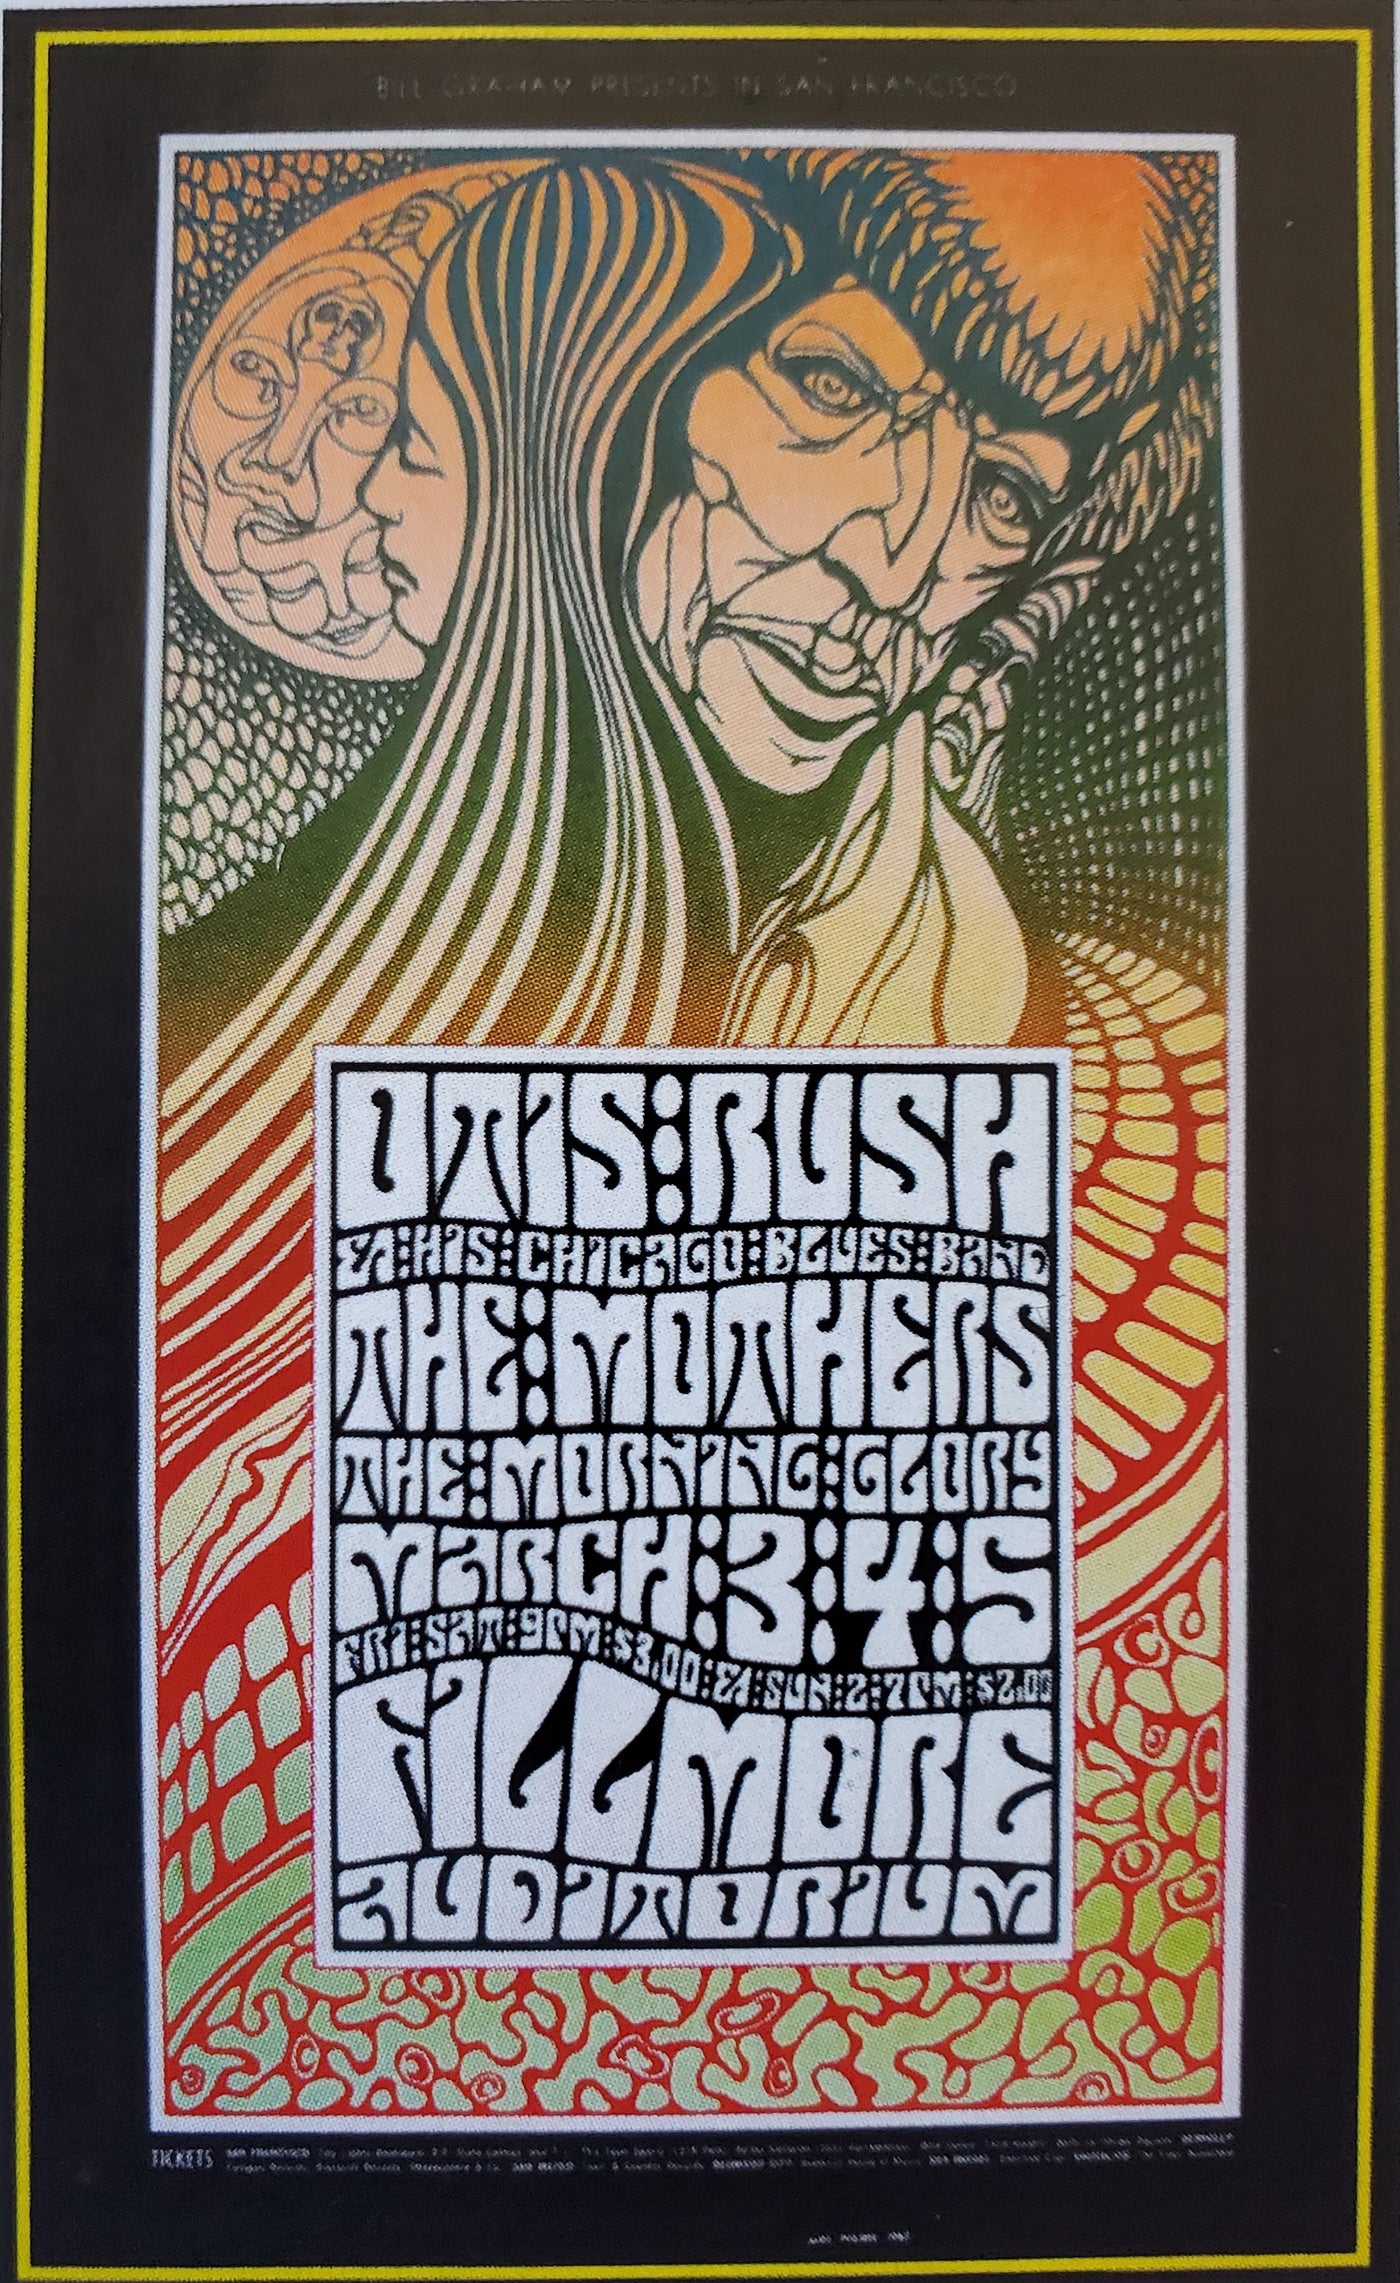 Afterthought Poster 286 Otis Rush/The Mothers